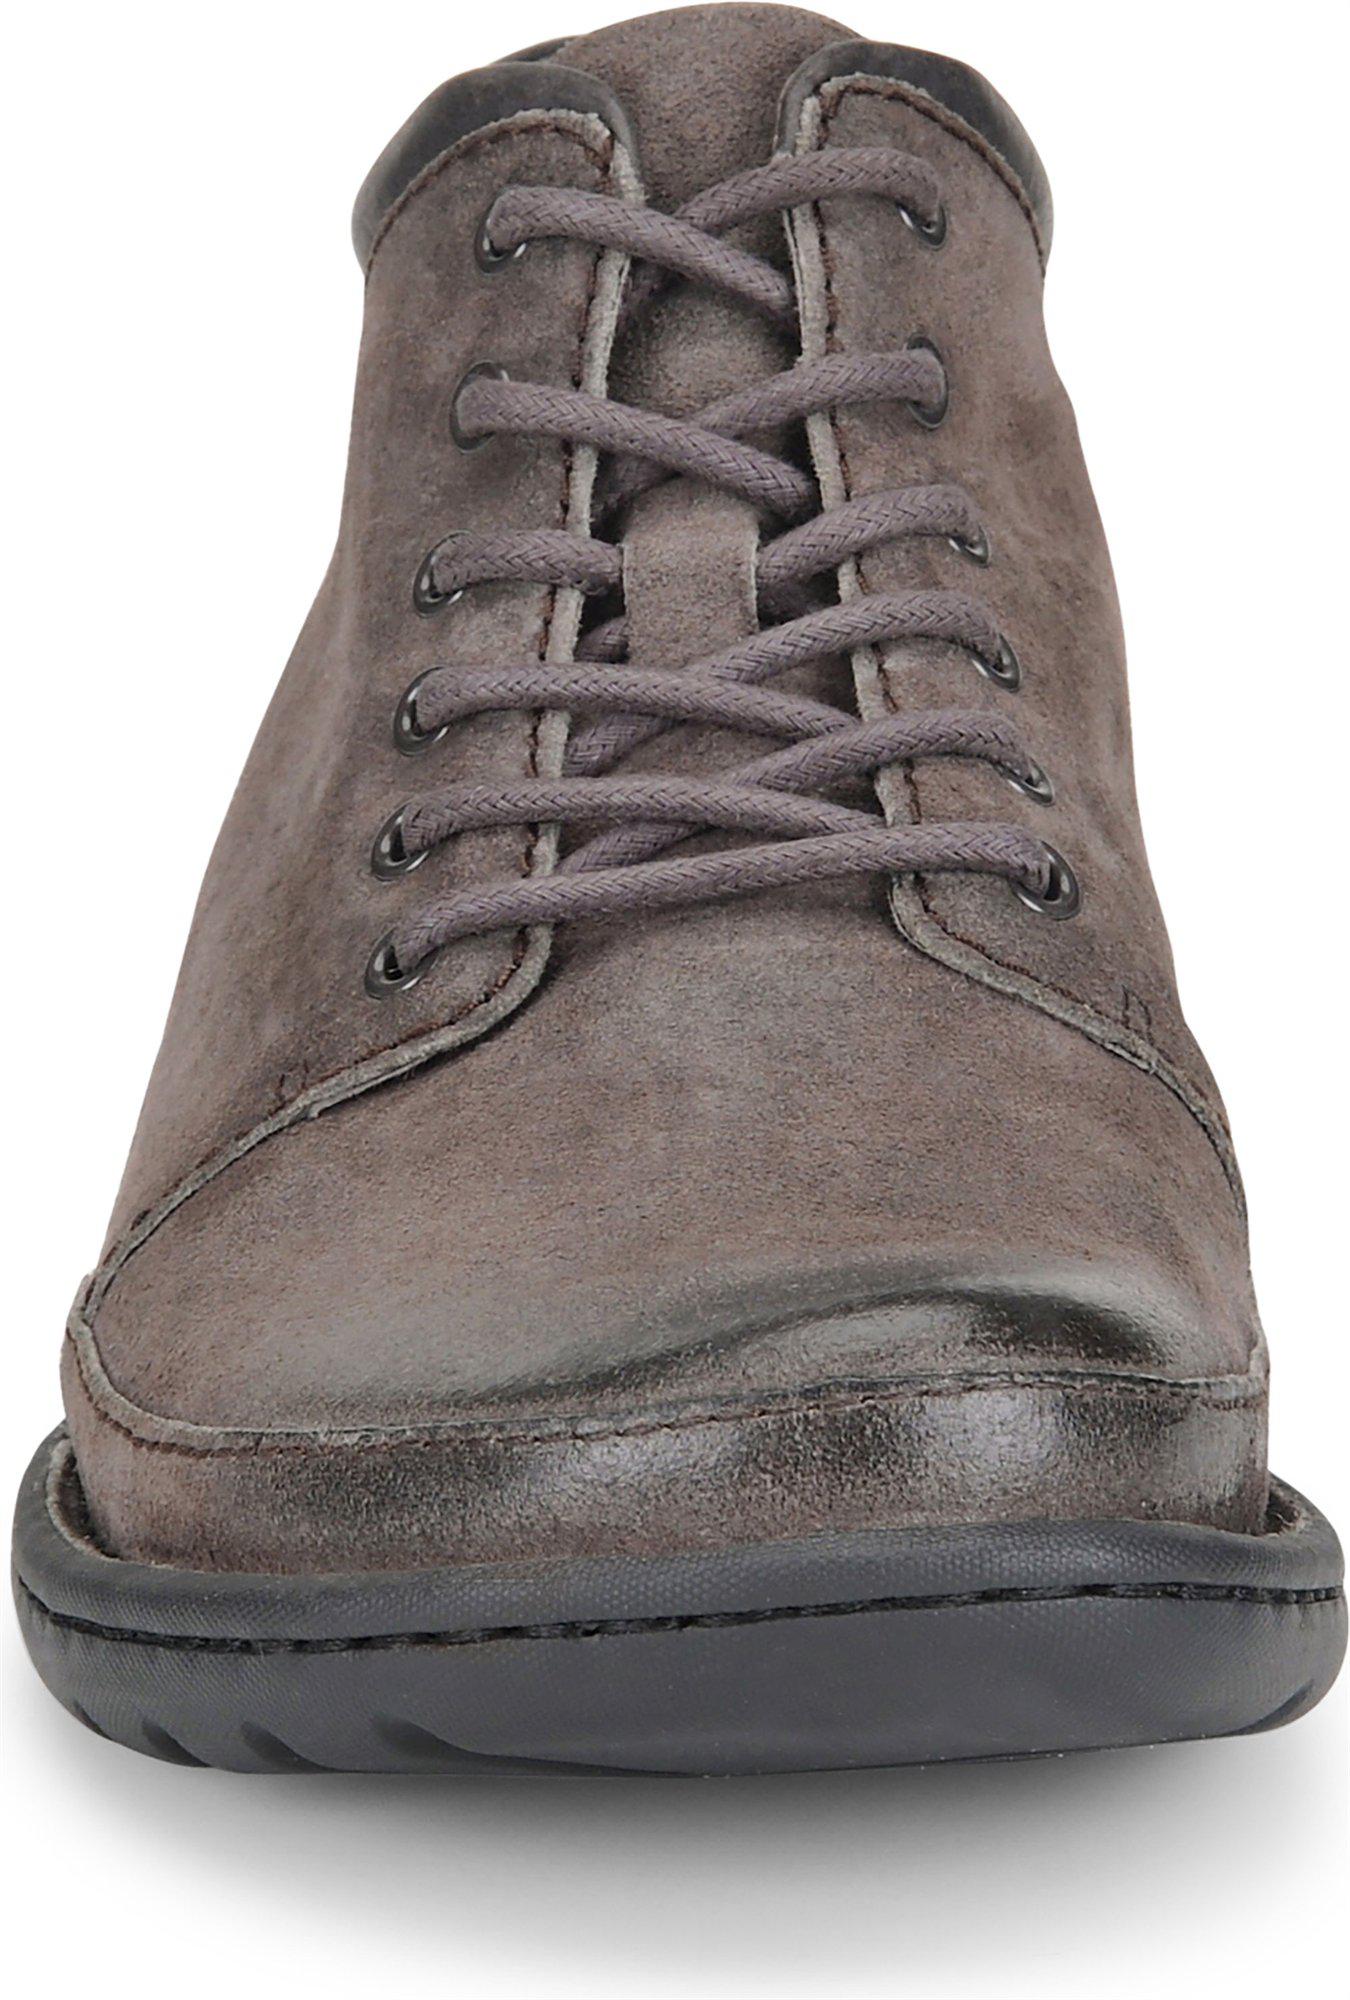 Born Suede Nigel Boots in Grey Combo 